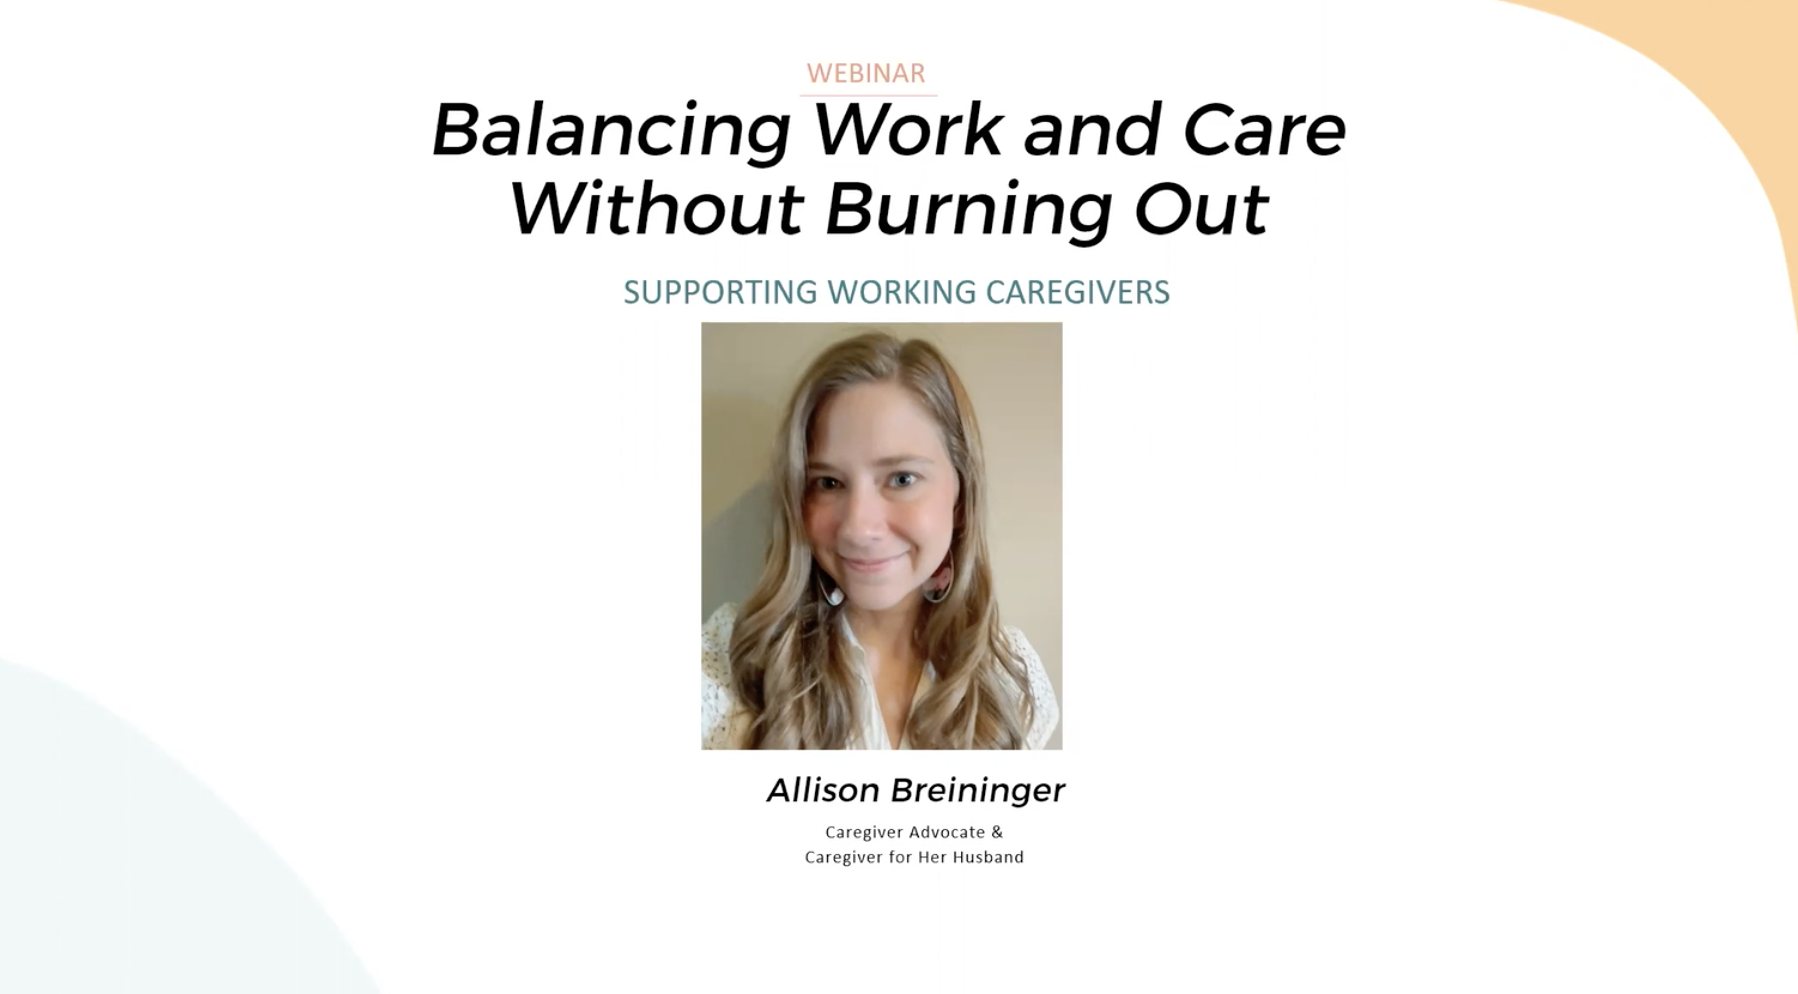 Watch: Balancing Work and Care Without Burning Out